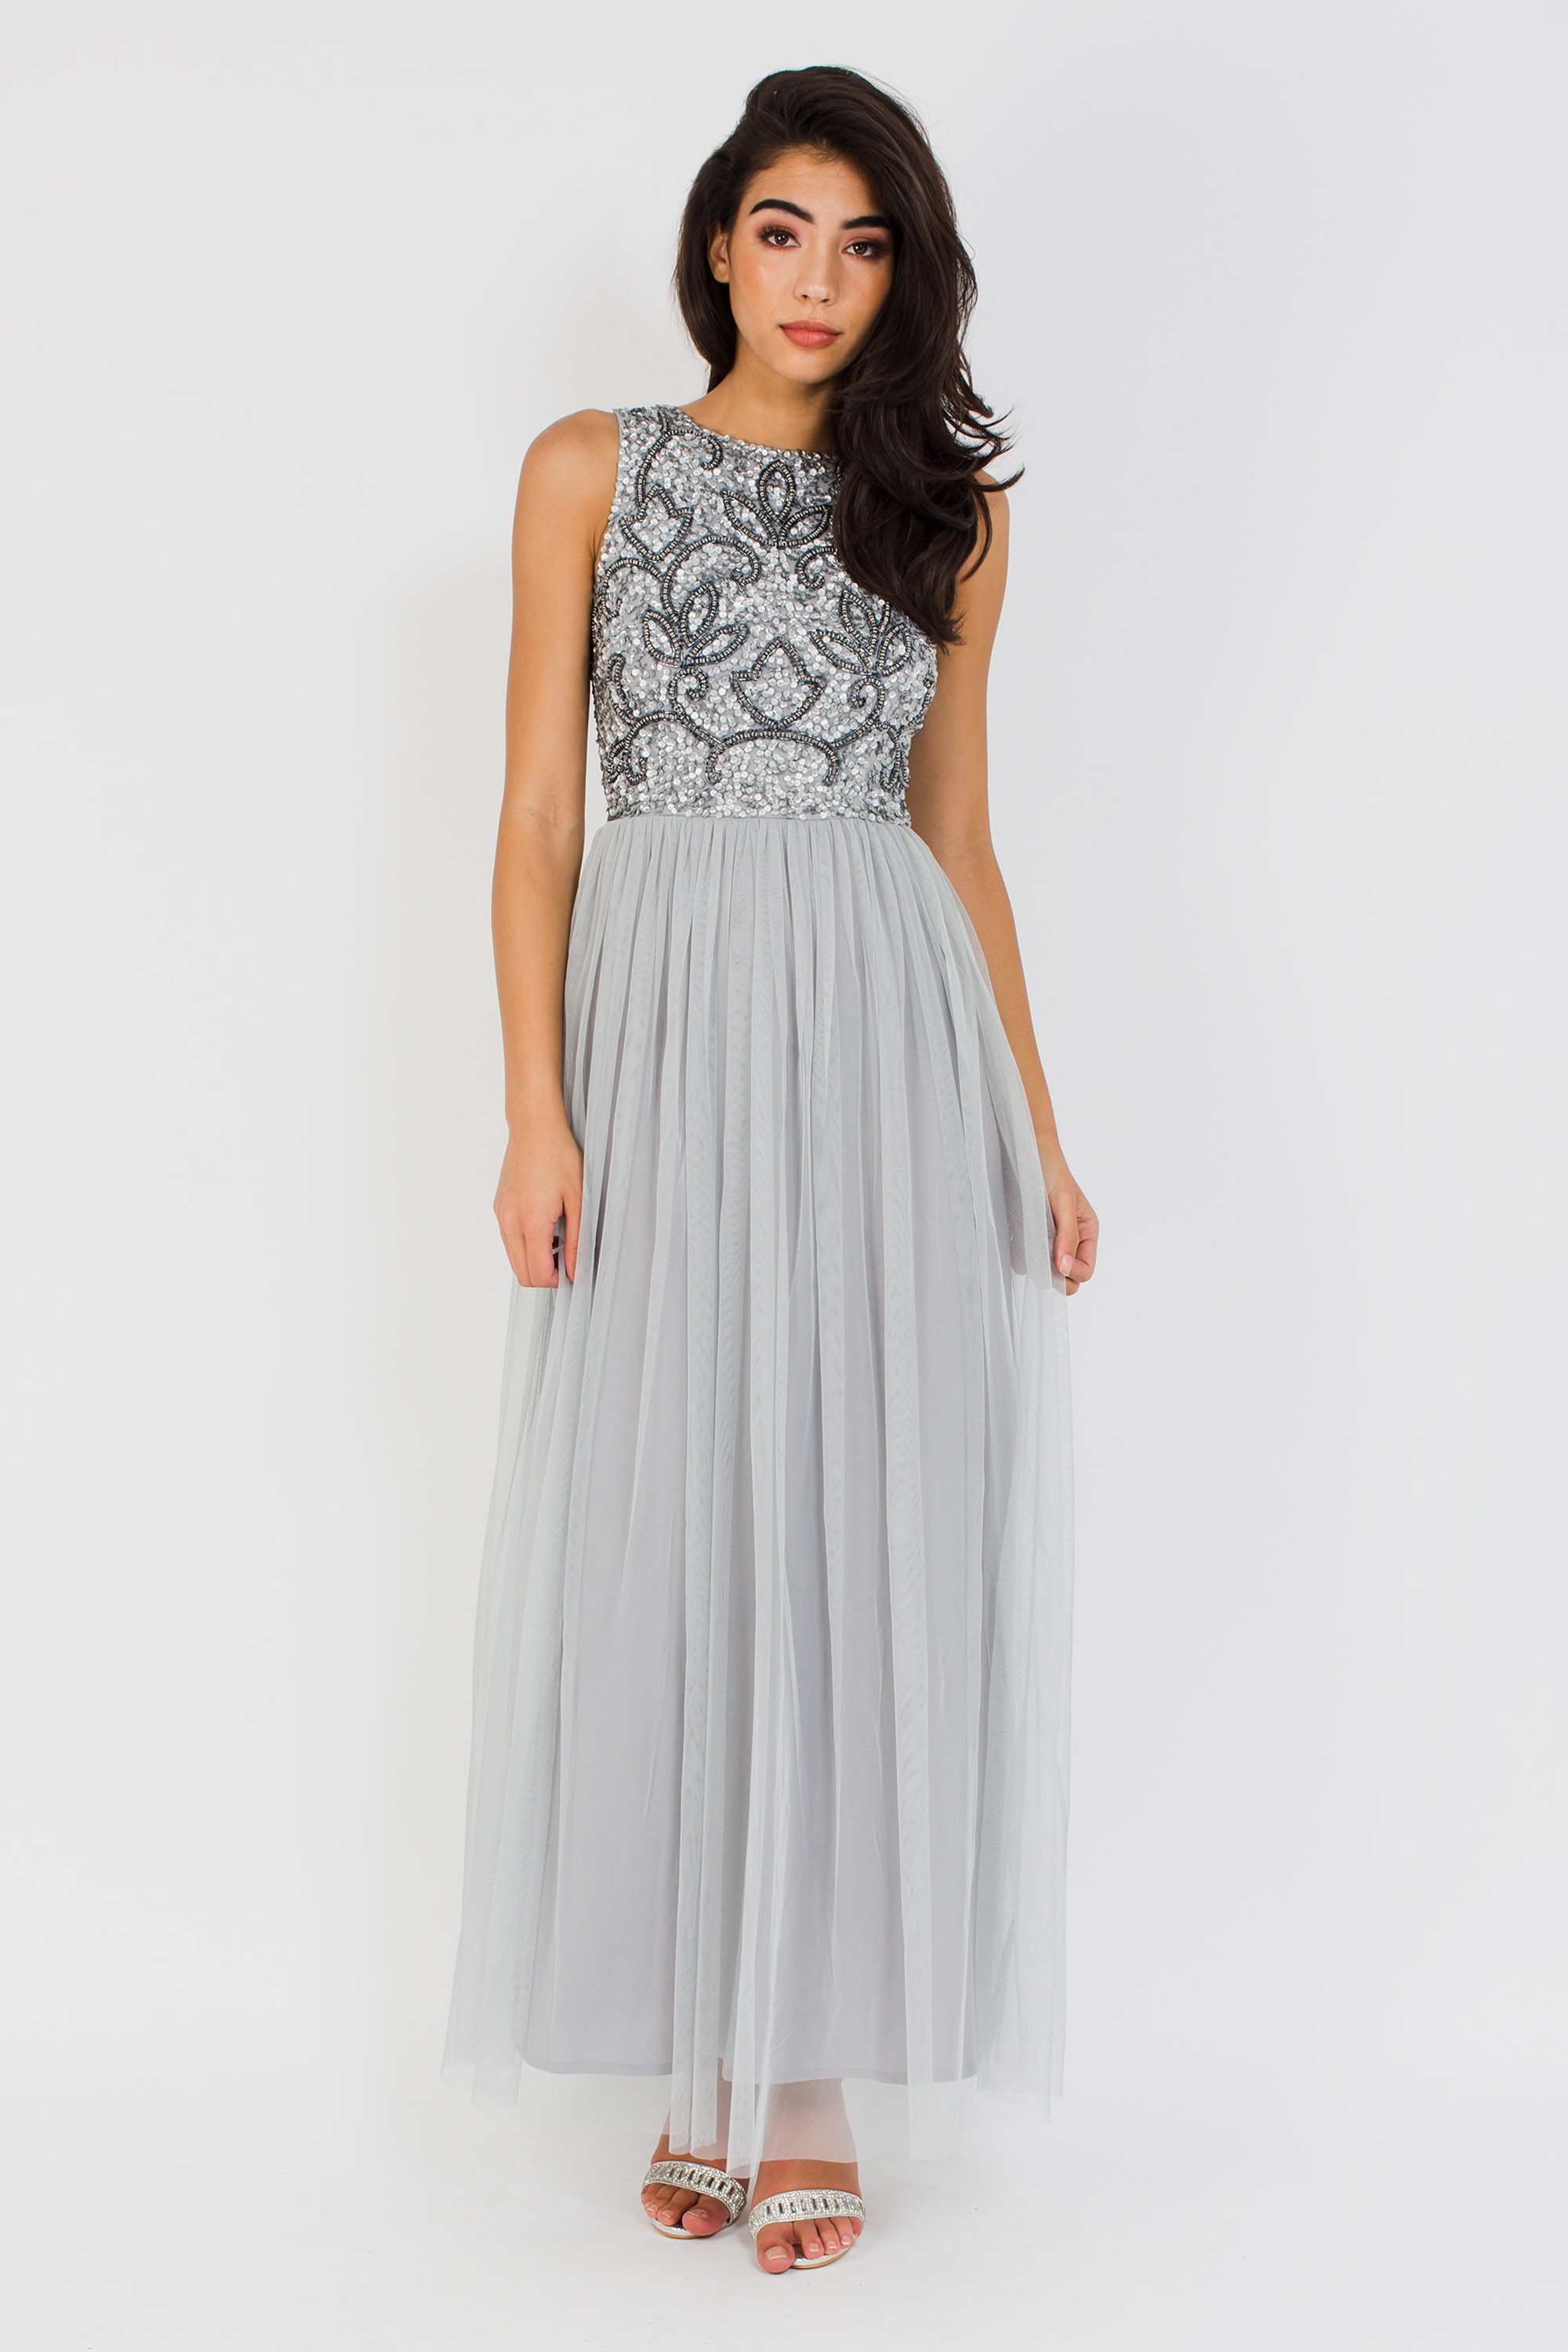 LACE & BEADS CHARME MAXI DRESS | PARTY DRESSES